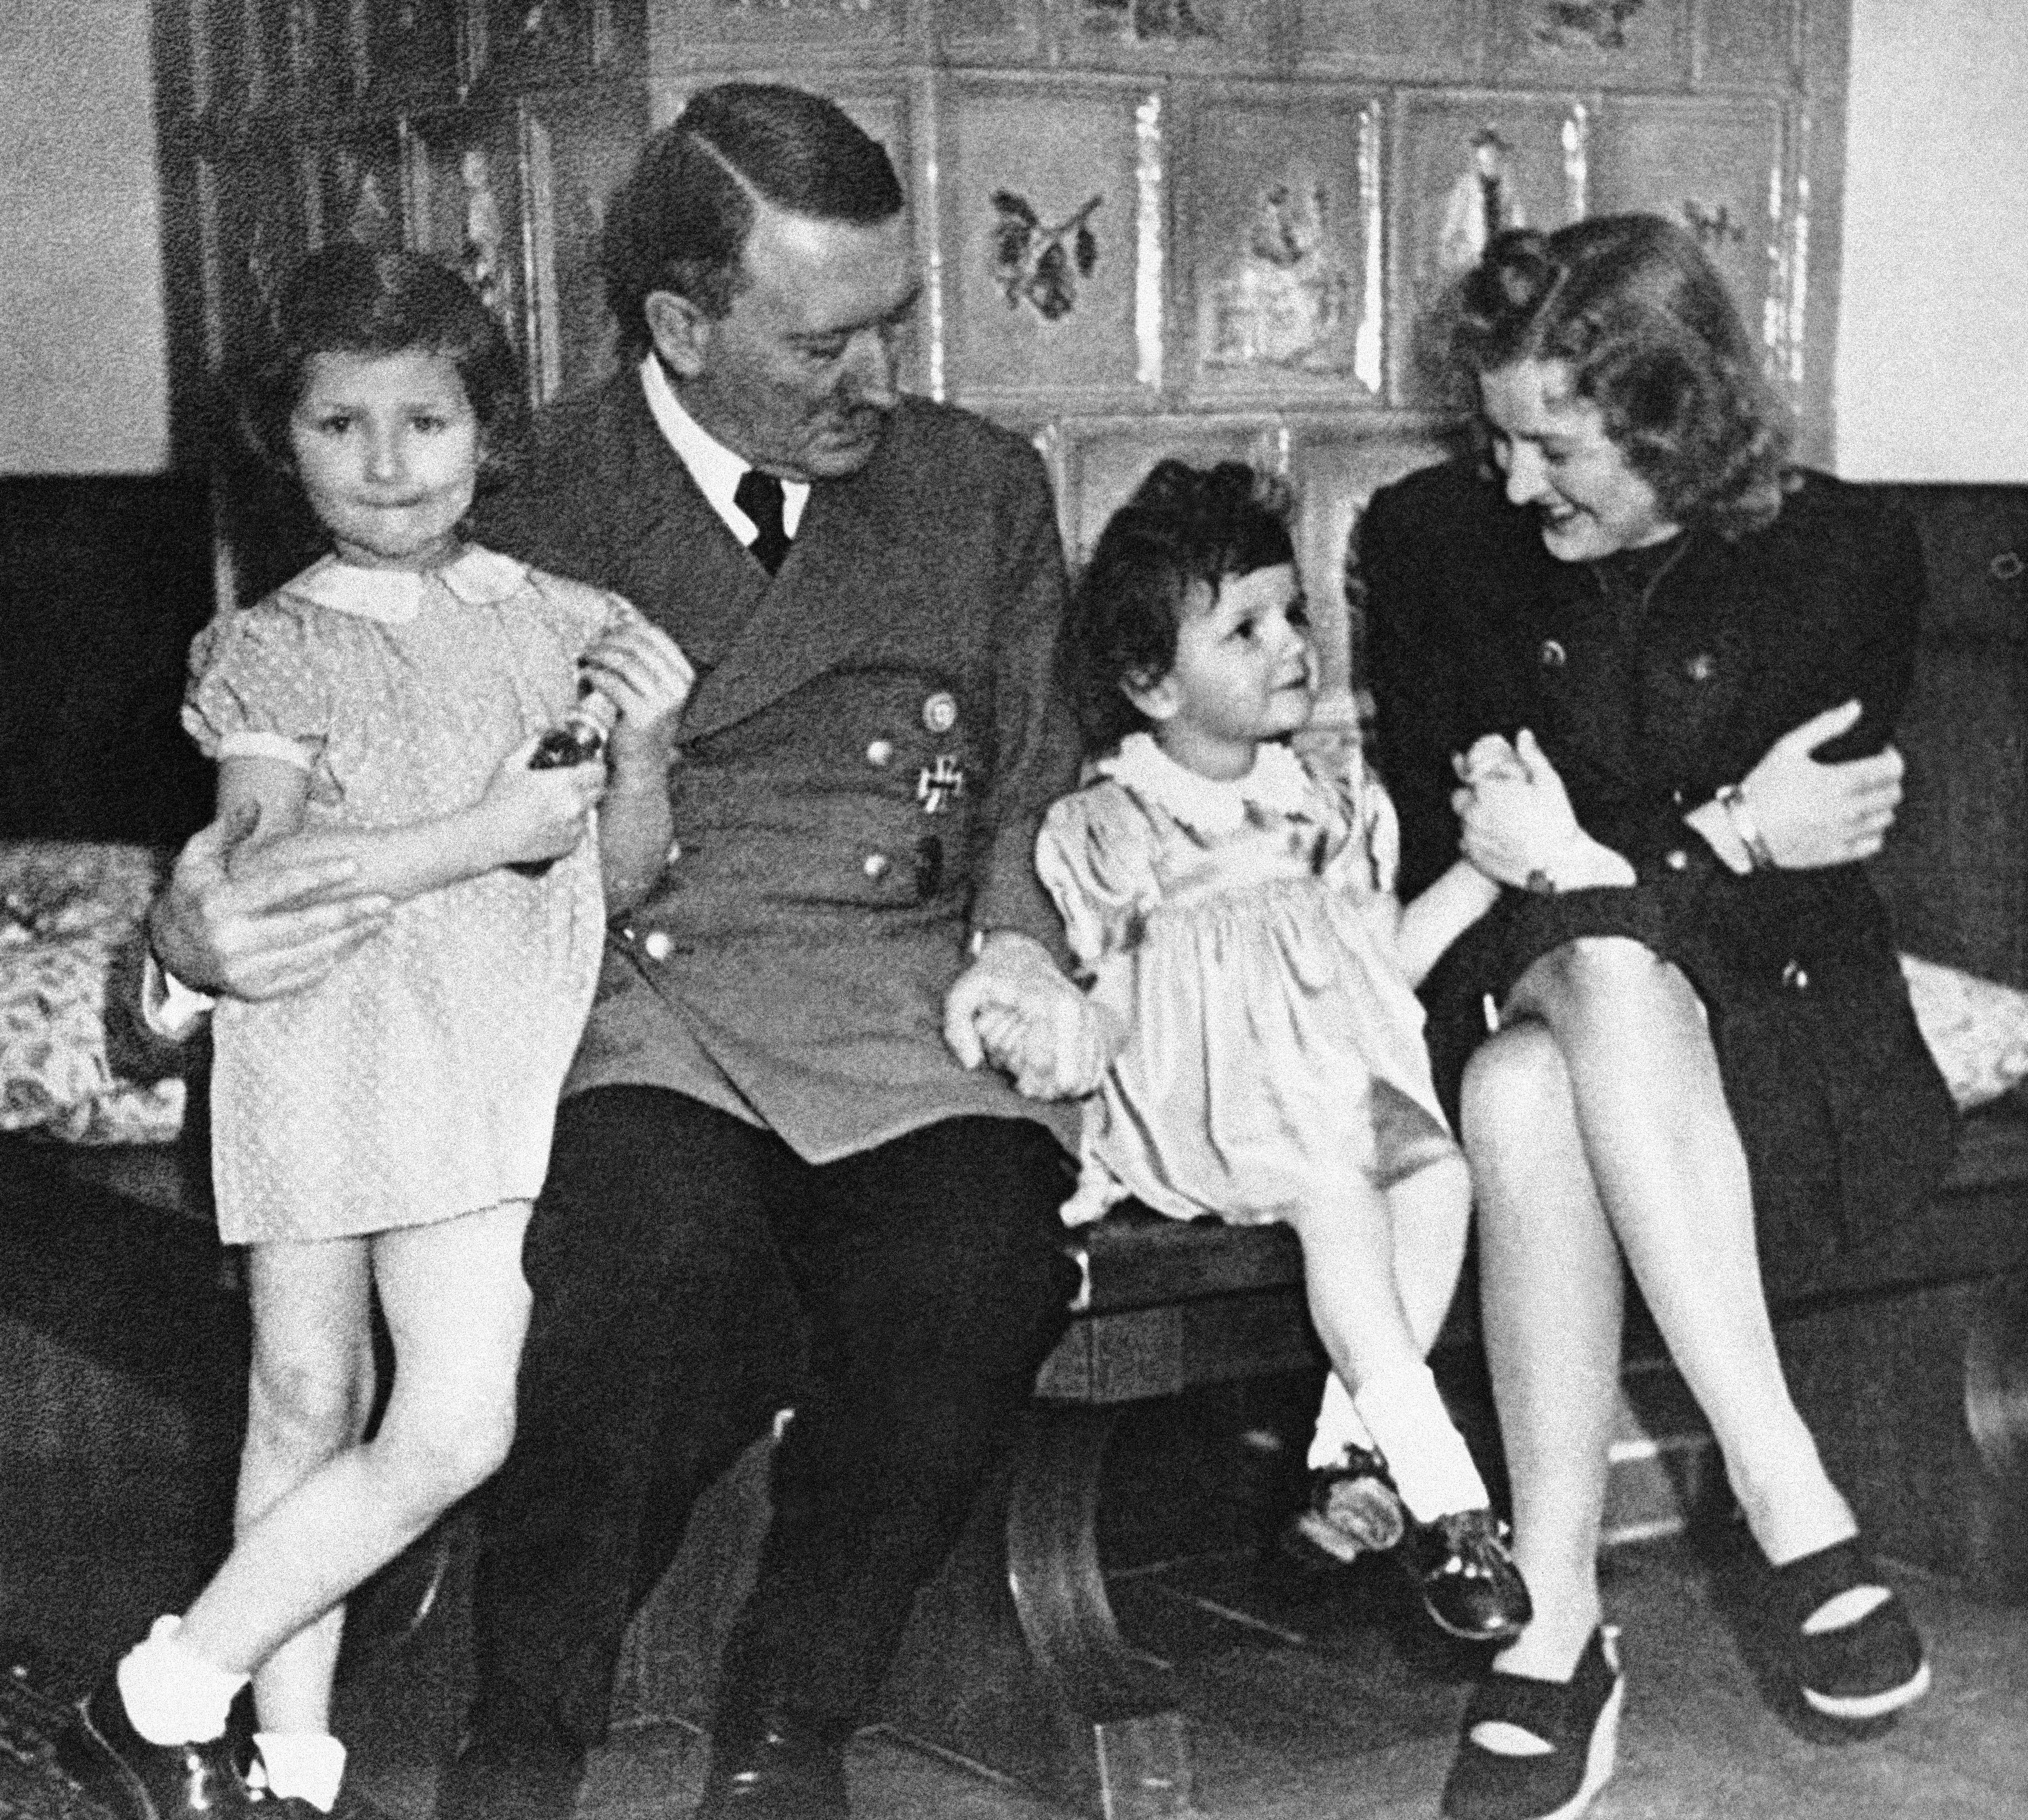 Family time: An undated photo of German Chancellor Adolf Hitler, his mistress Eva Braun and two girls were among the many items found in 1945 in a treasure chest belonging to Braun that give an intimate glimpse of the Nazi leader's private life. | AP